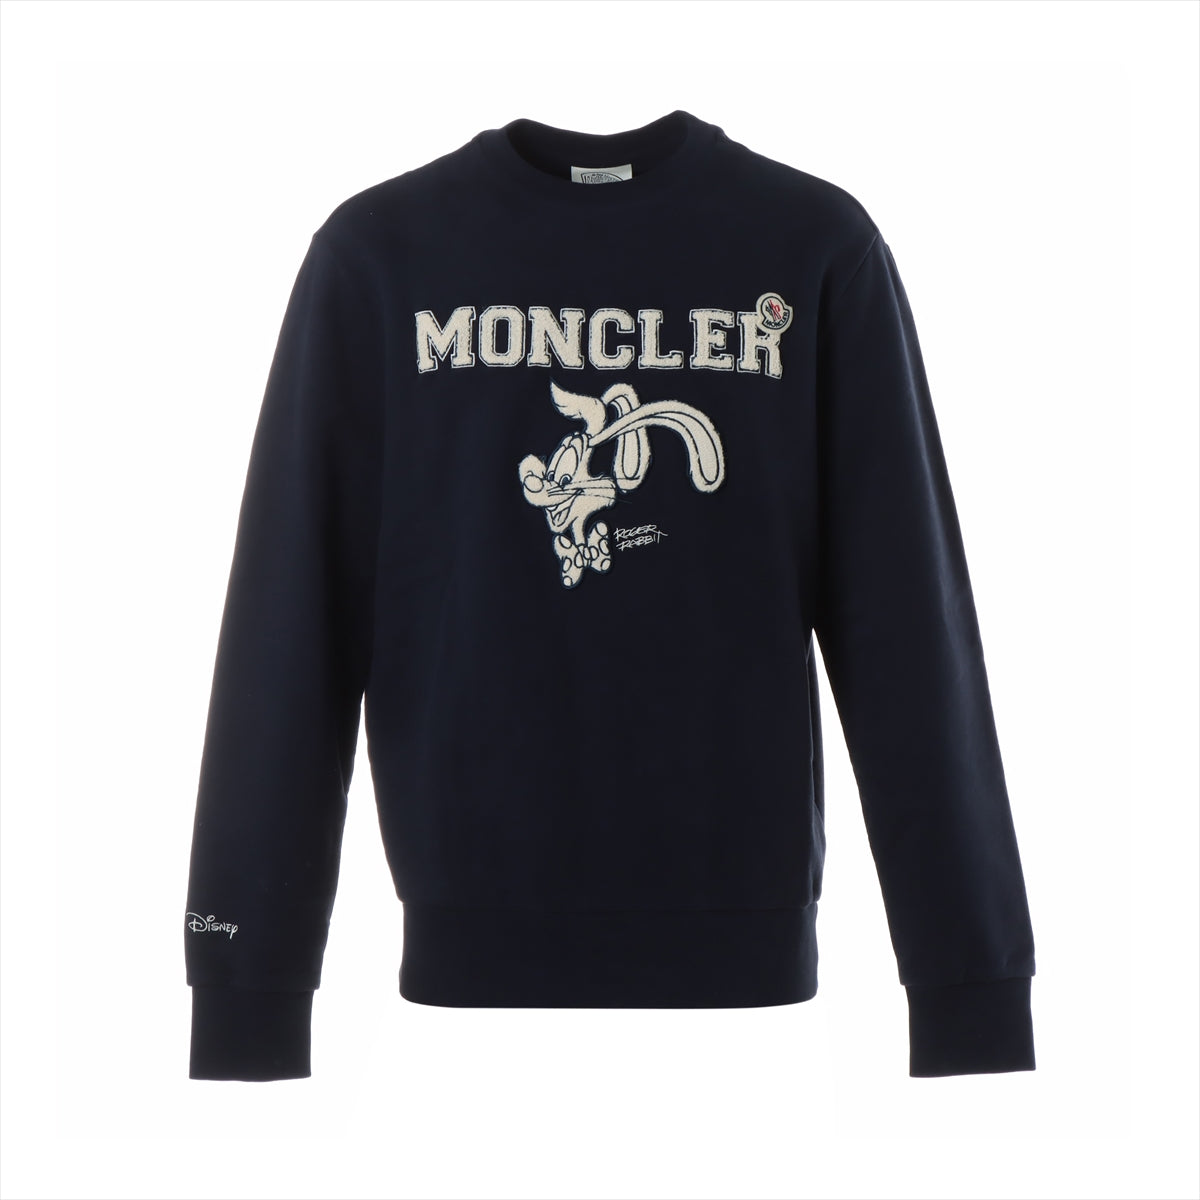 MONCLER モンクレール グラデーションロゴ 希少 - スウェット